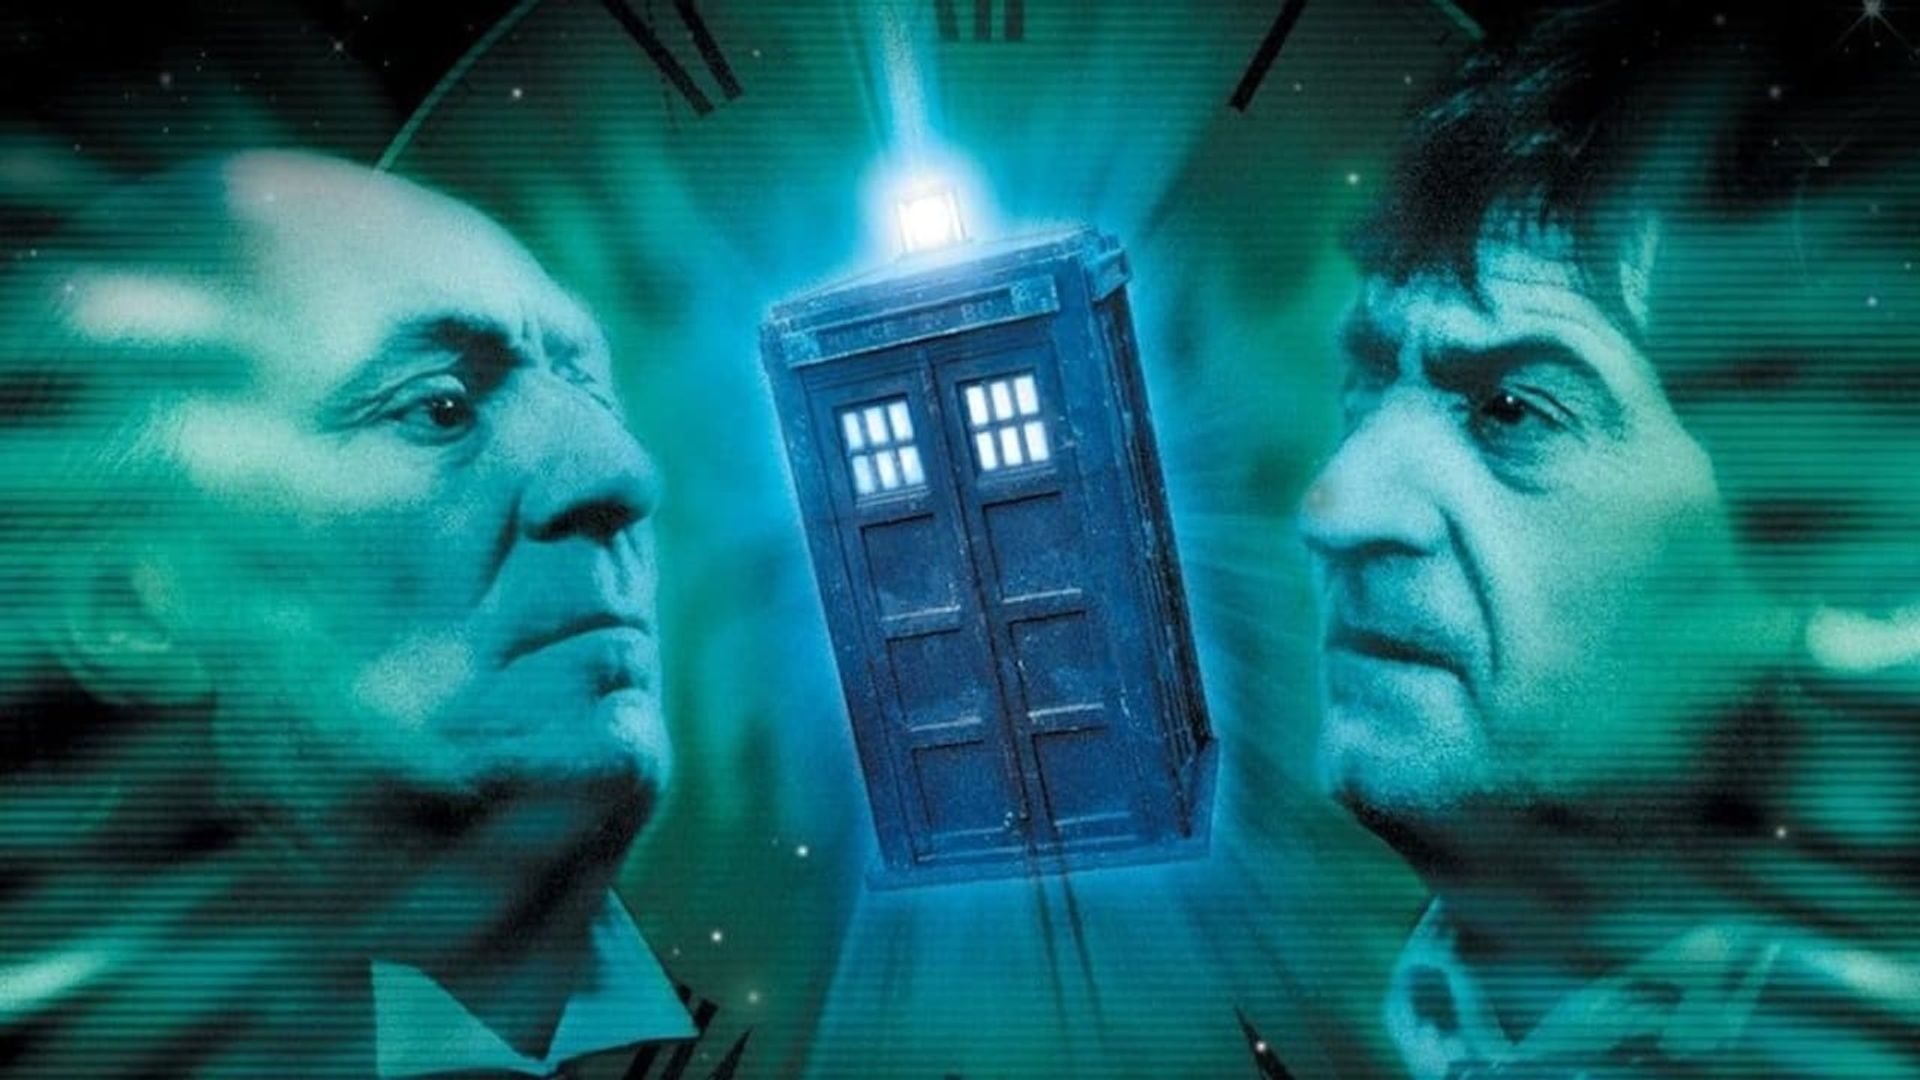 Doctor Who: The Missing Years background